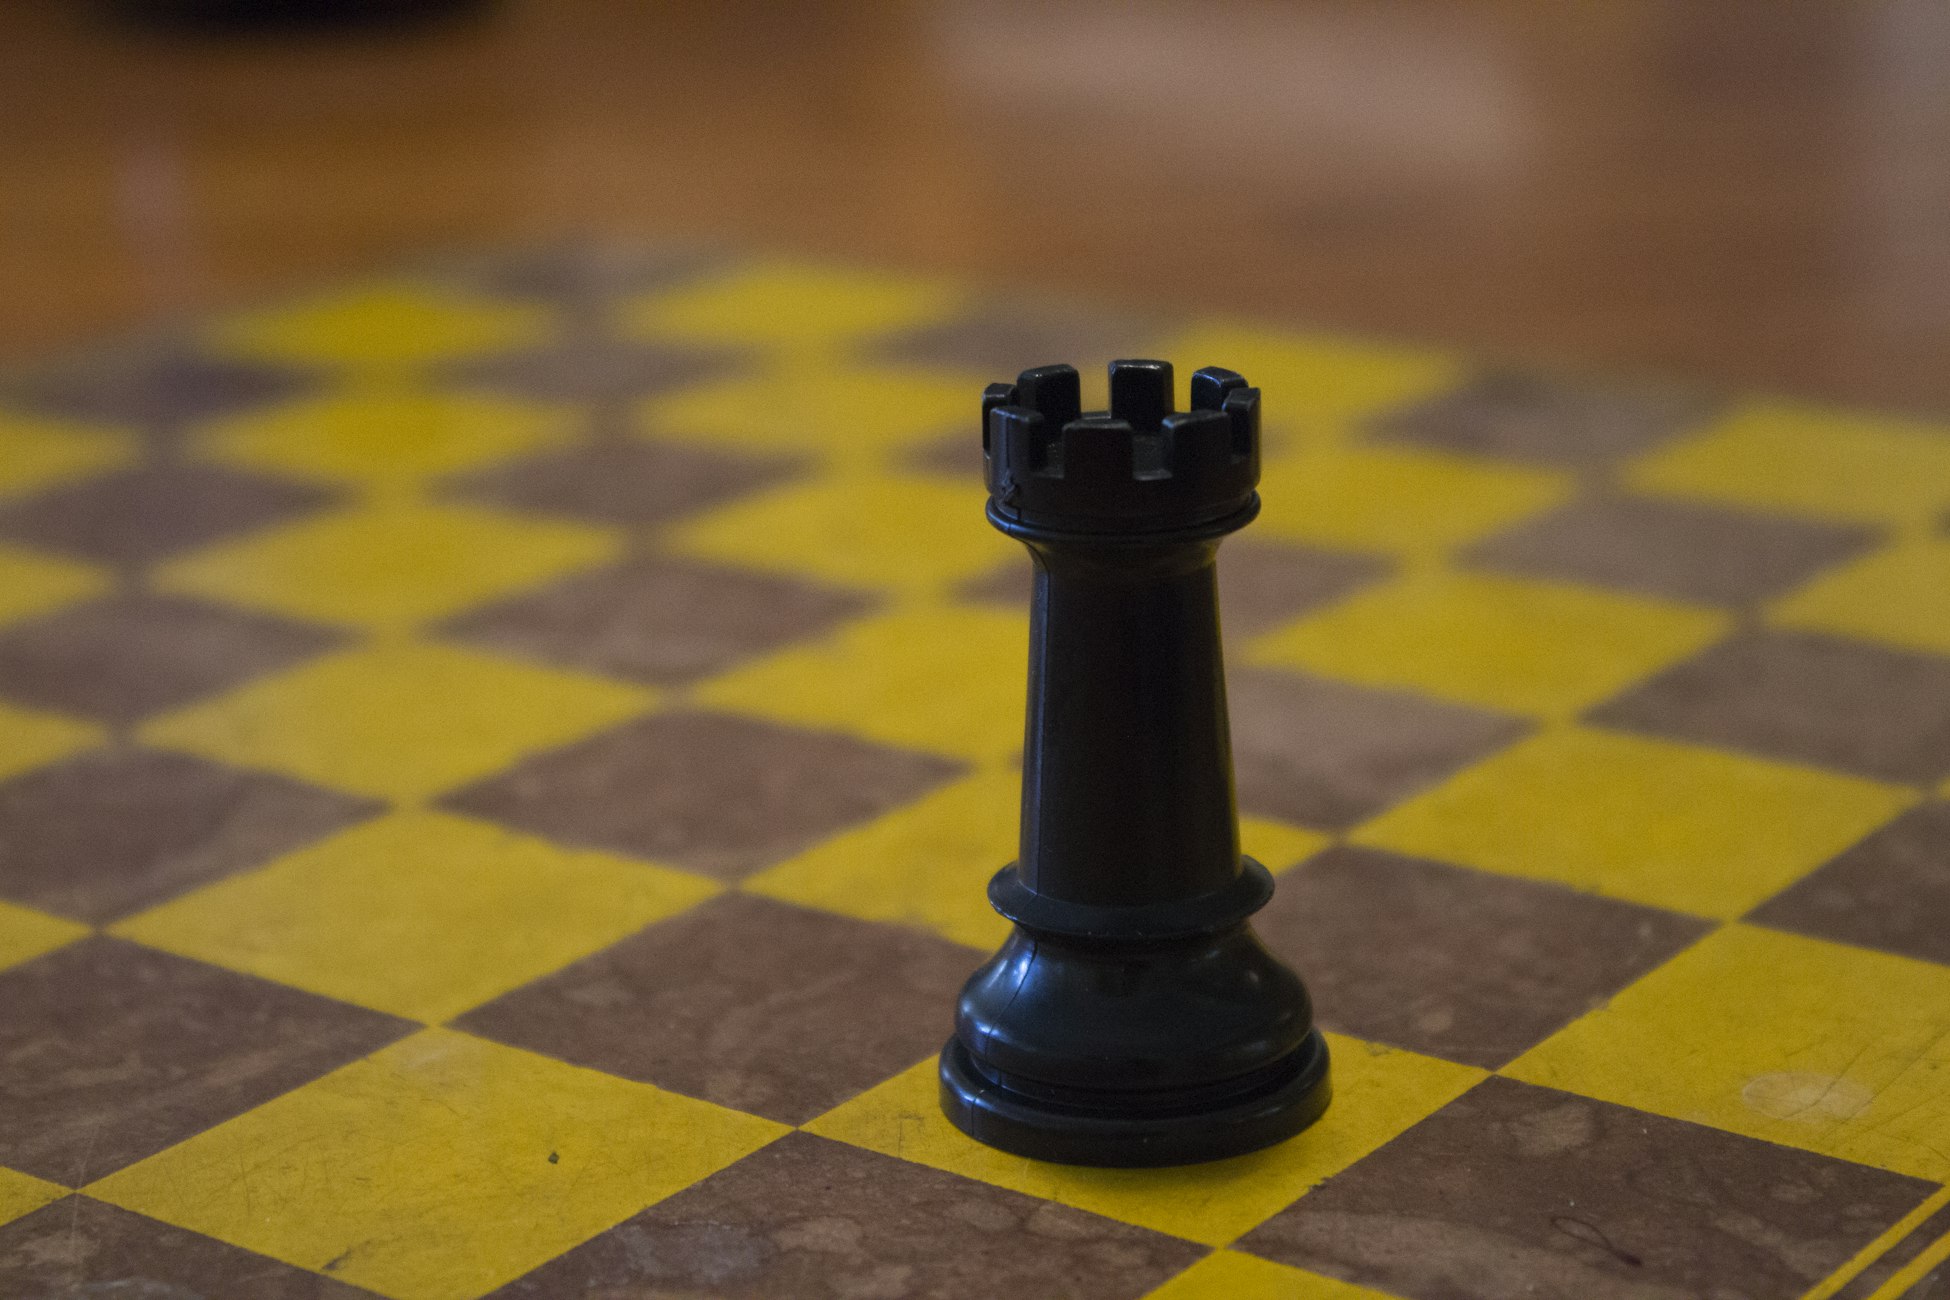 Rooks on Chessboard - Problems and Algorithms